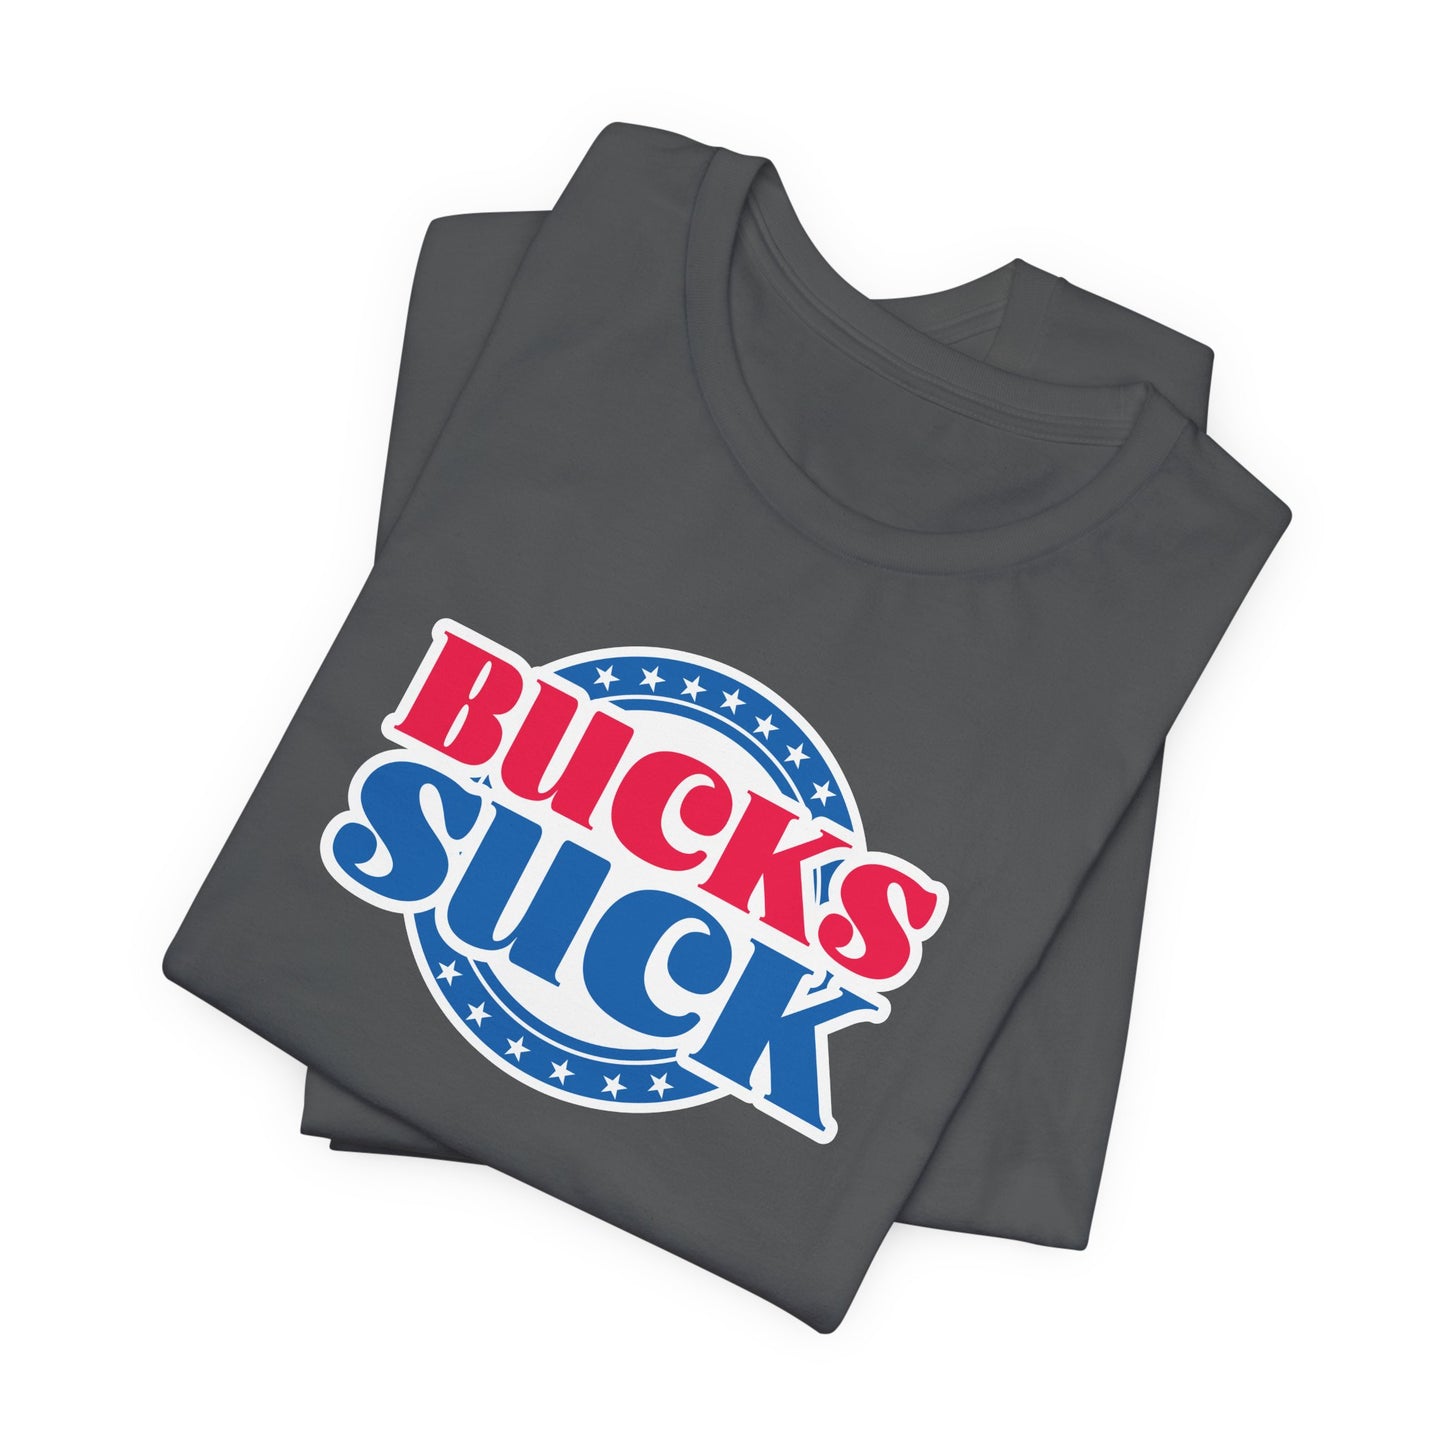 Bux Suck (for Philly fans) - Unisex Jersey Short Sleeve Tee